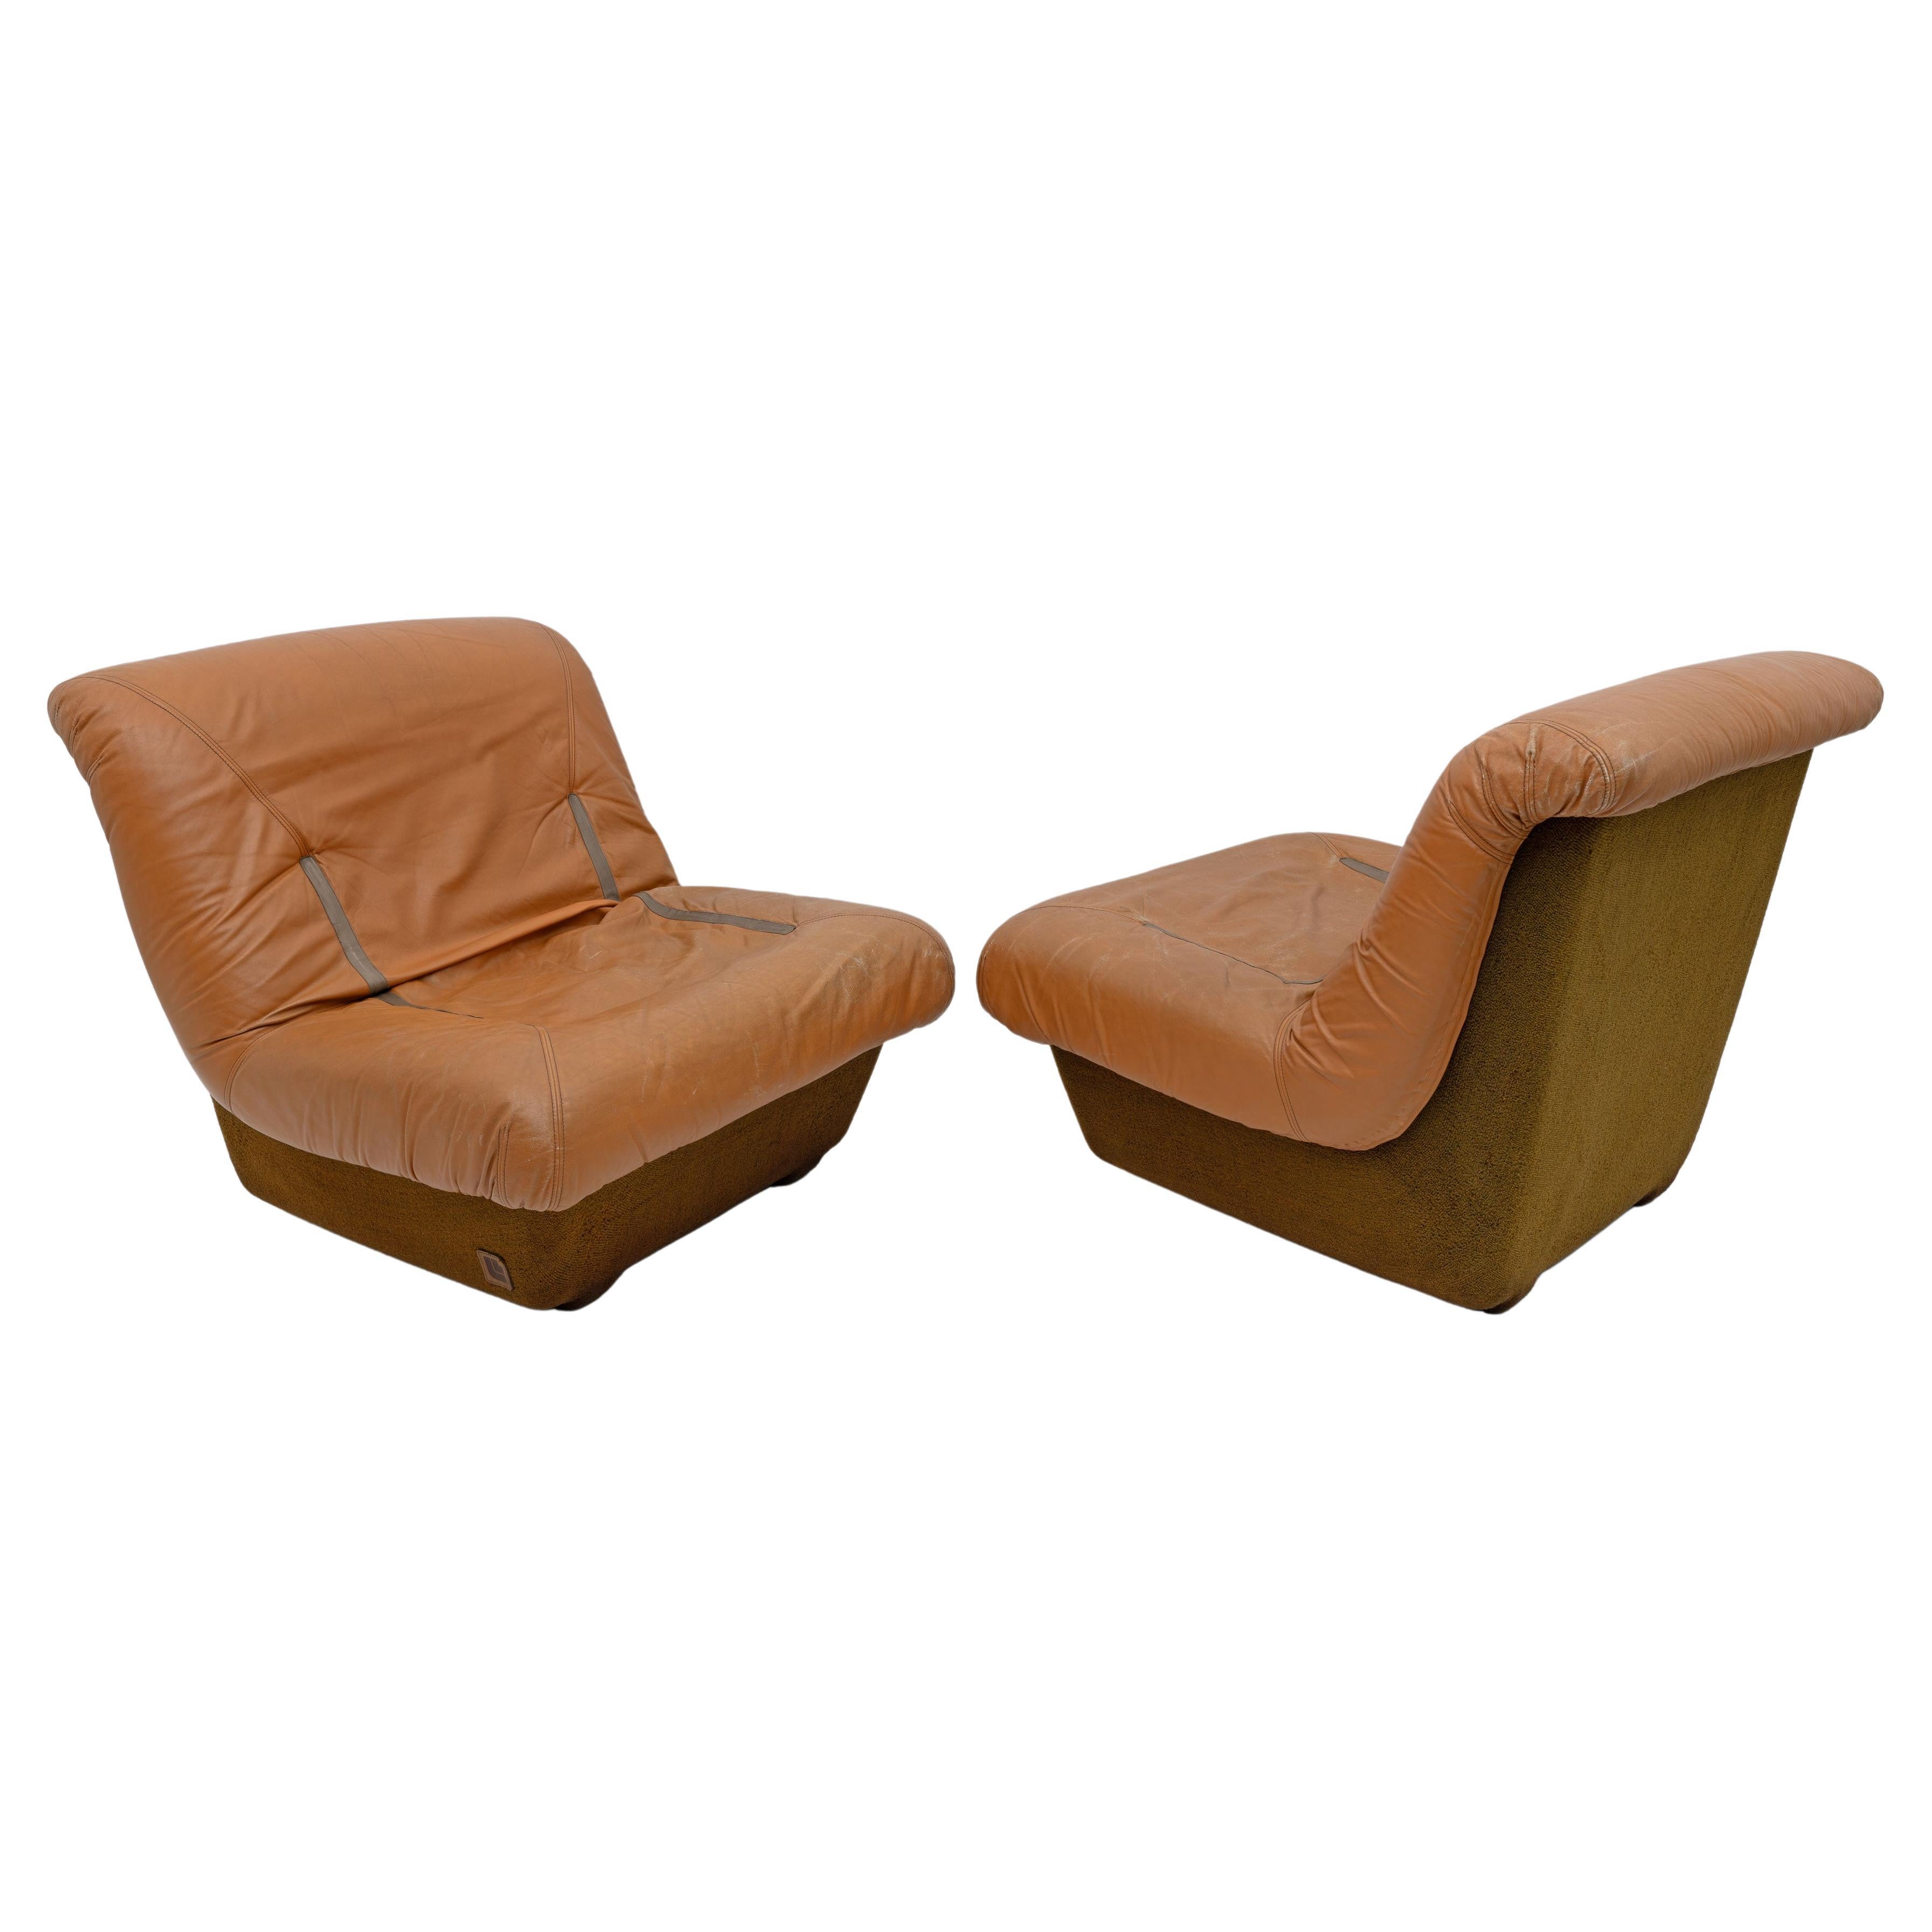 Pair of Lev & Lev Mid-century Modern Fiberglass Frame Leather Armchairs For Sale